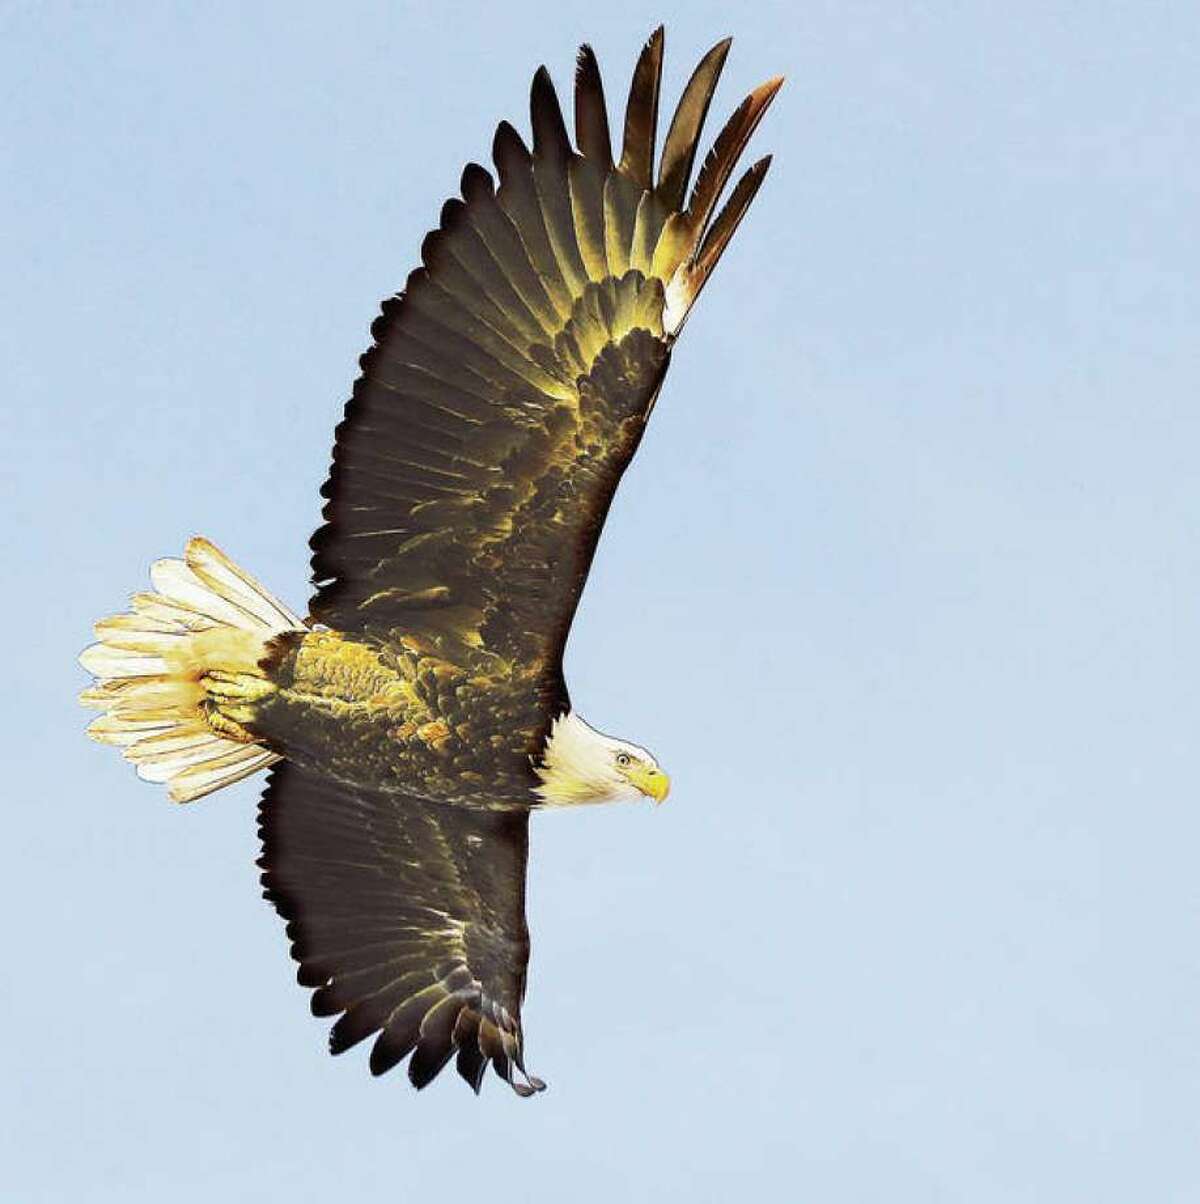 The Bald Eagle Festival will take place at the Pere Marquette Lodge and Conference Center, 13653 Lodge Blvd., Grafton from 11 a.m.-3 p.m. Sunday, Jan. 22.